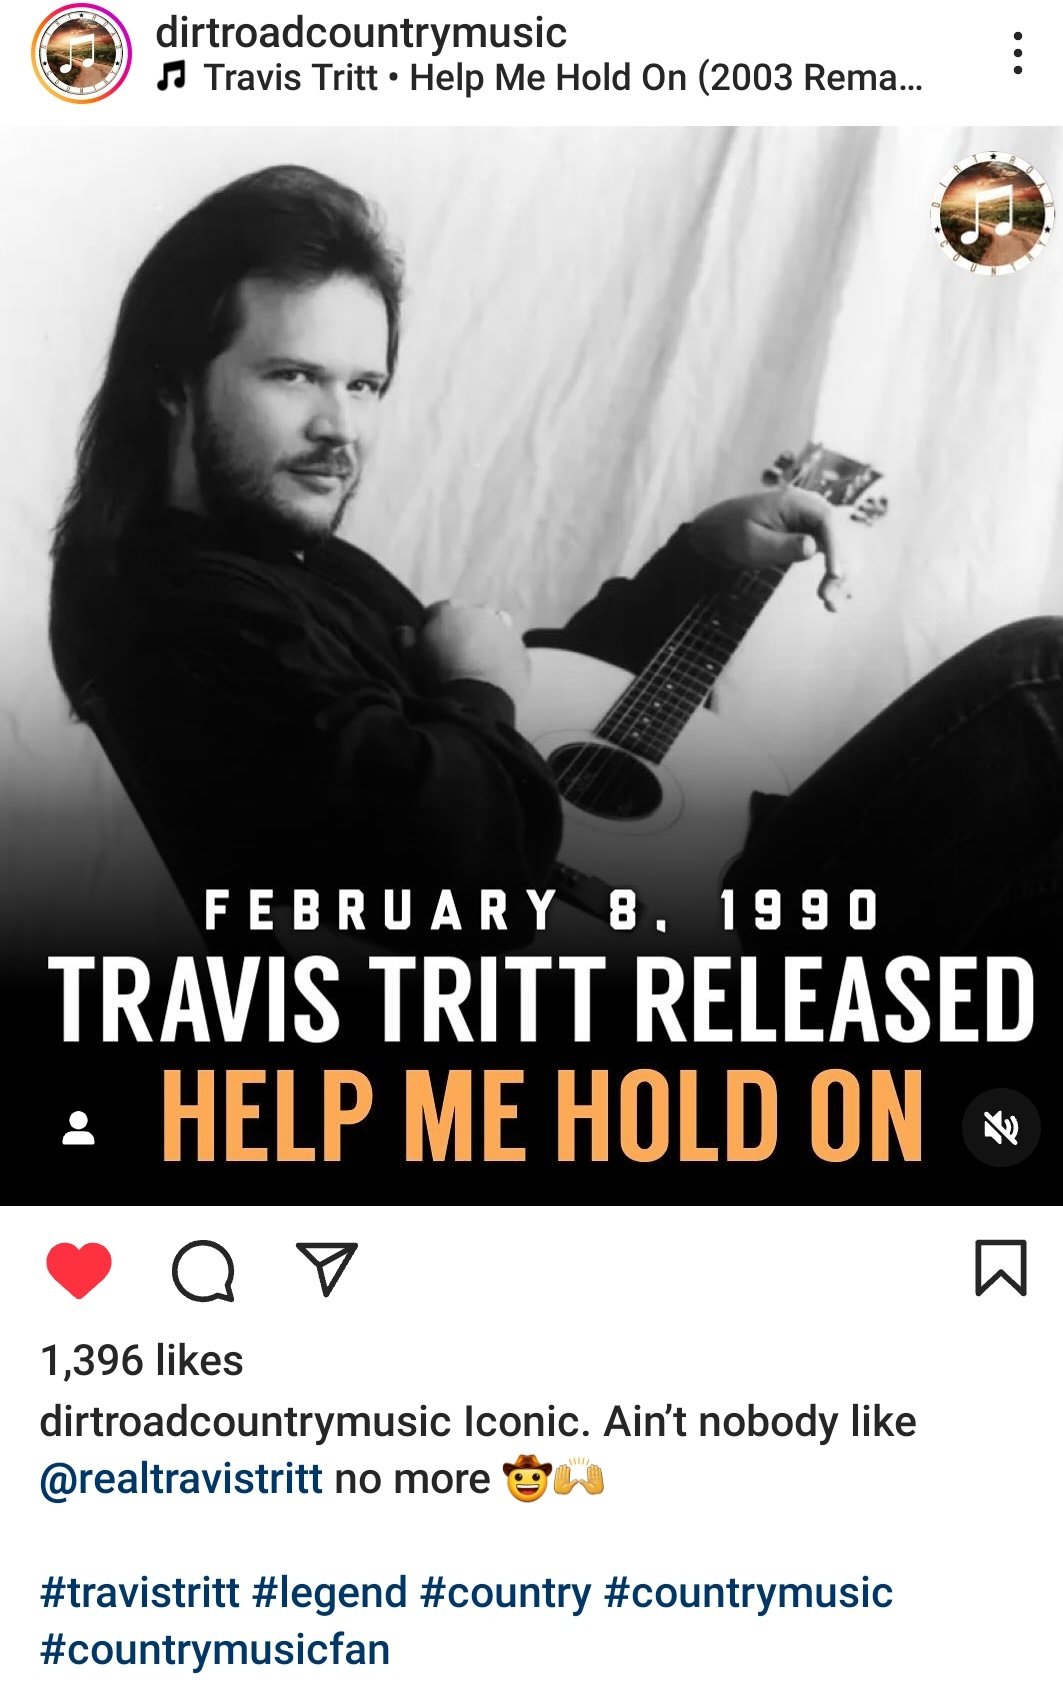 Travis Tritt - Let There Be Light